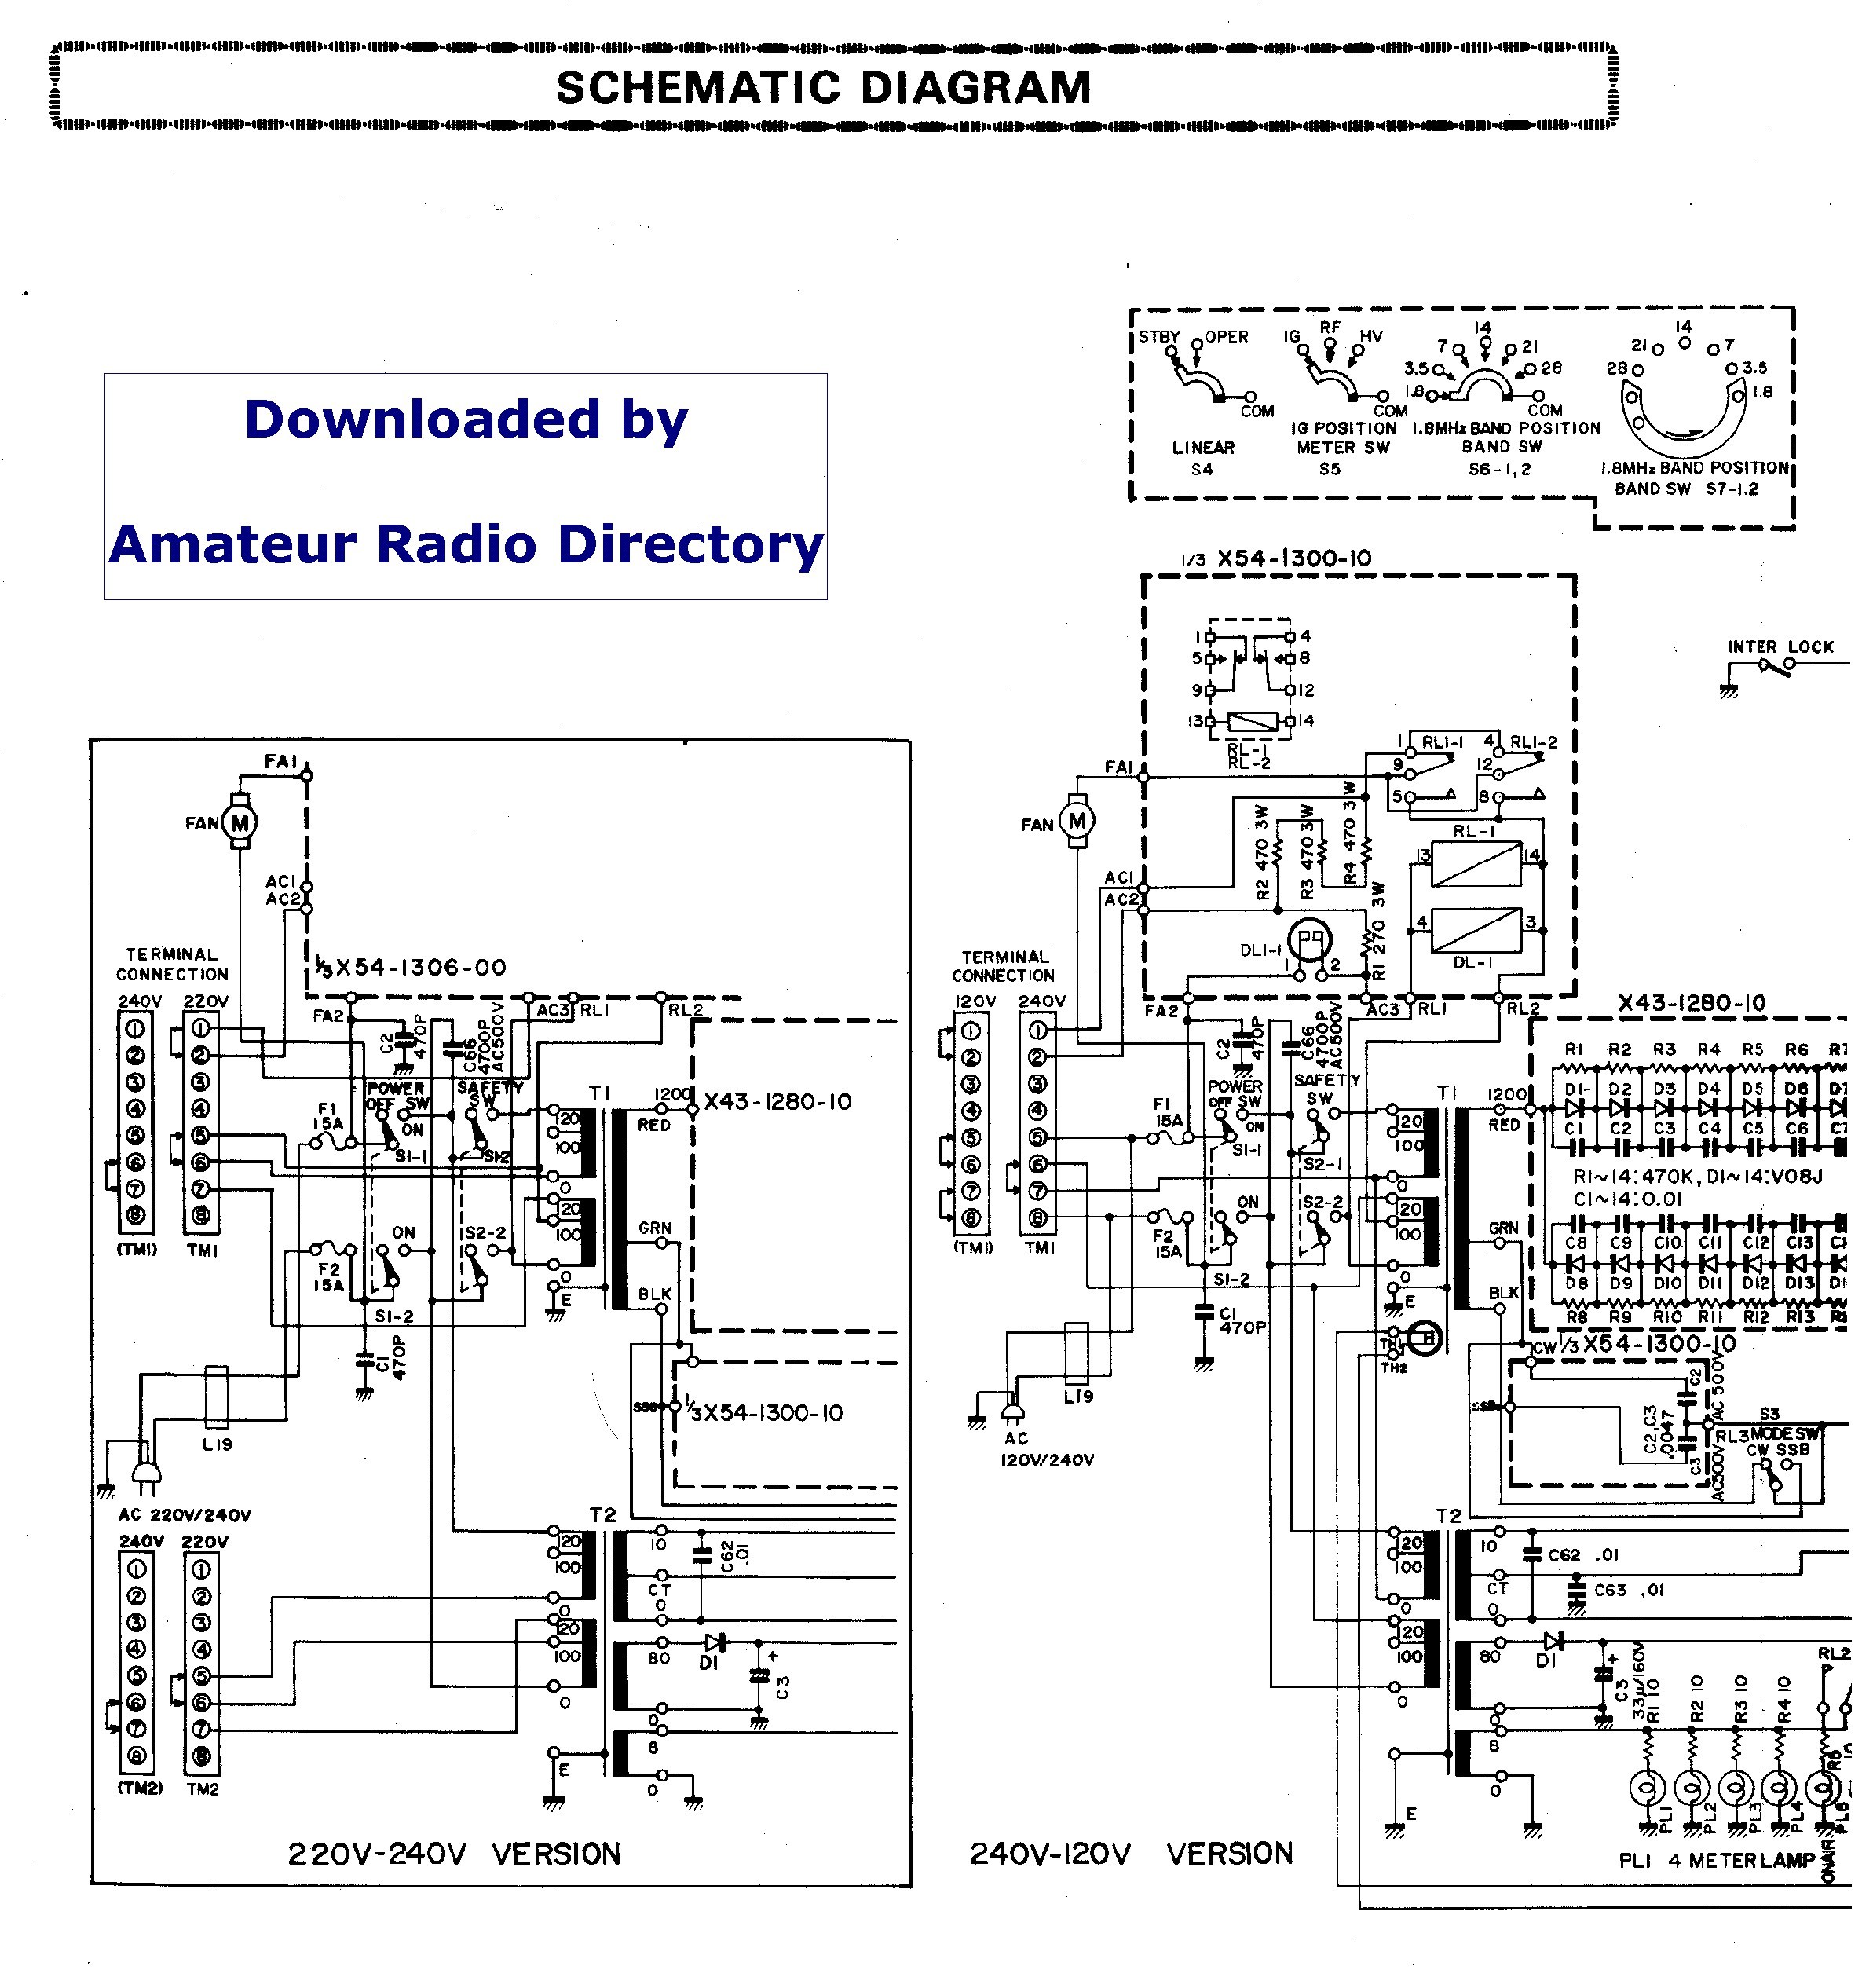 Electrical Wiring Diagrams Kenwood Dnx5140 Diagram Schematic 240v 120v Version wiring schematic for wiring